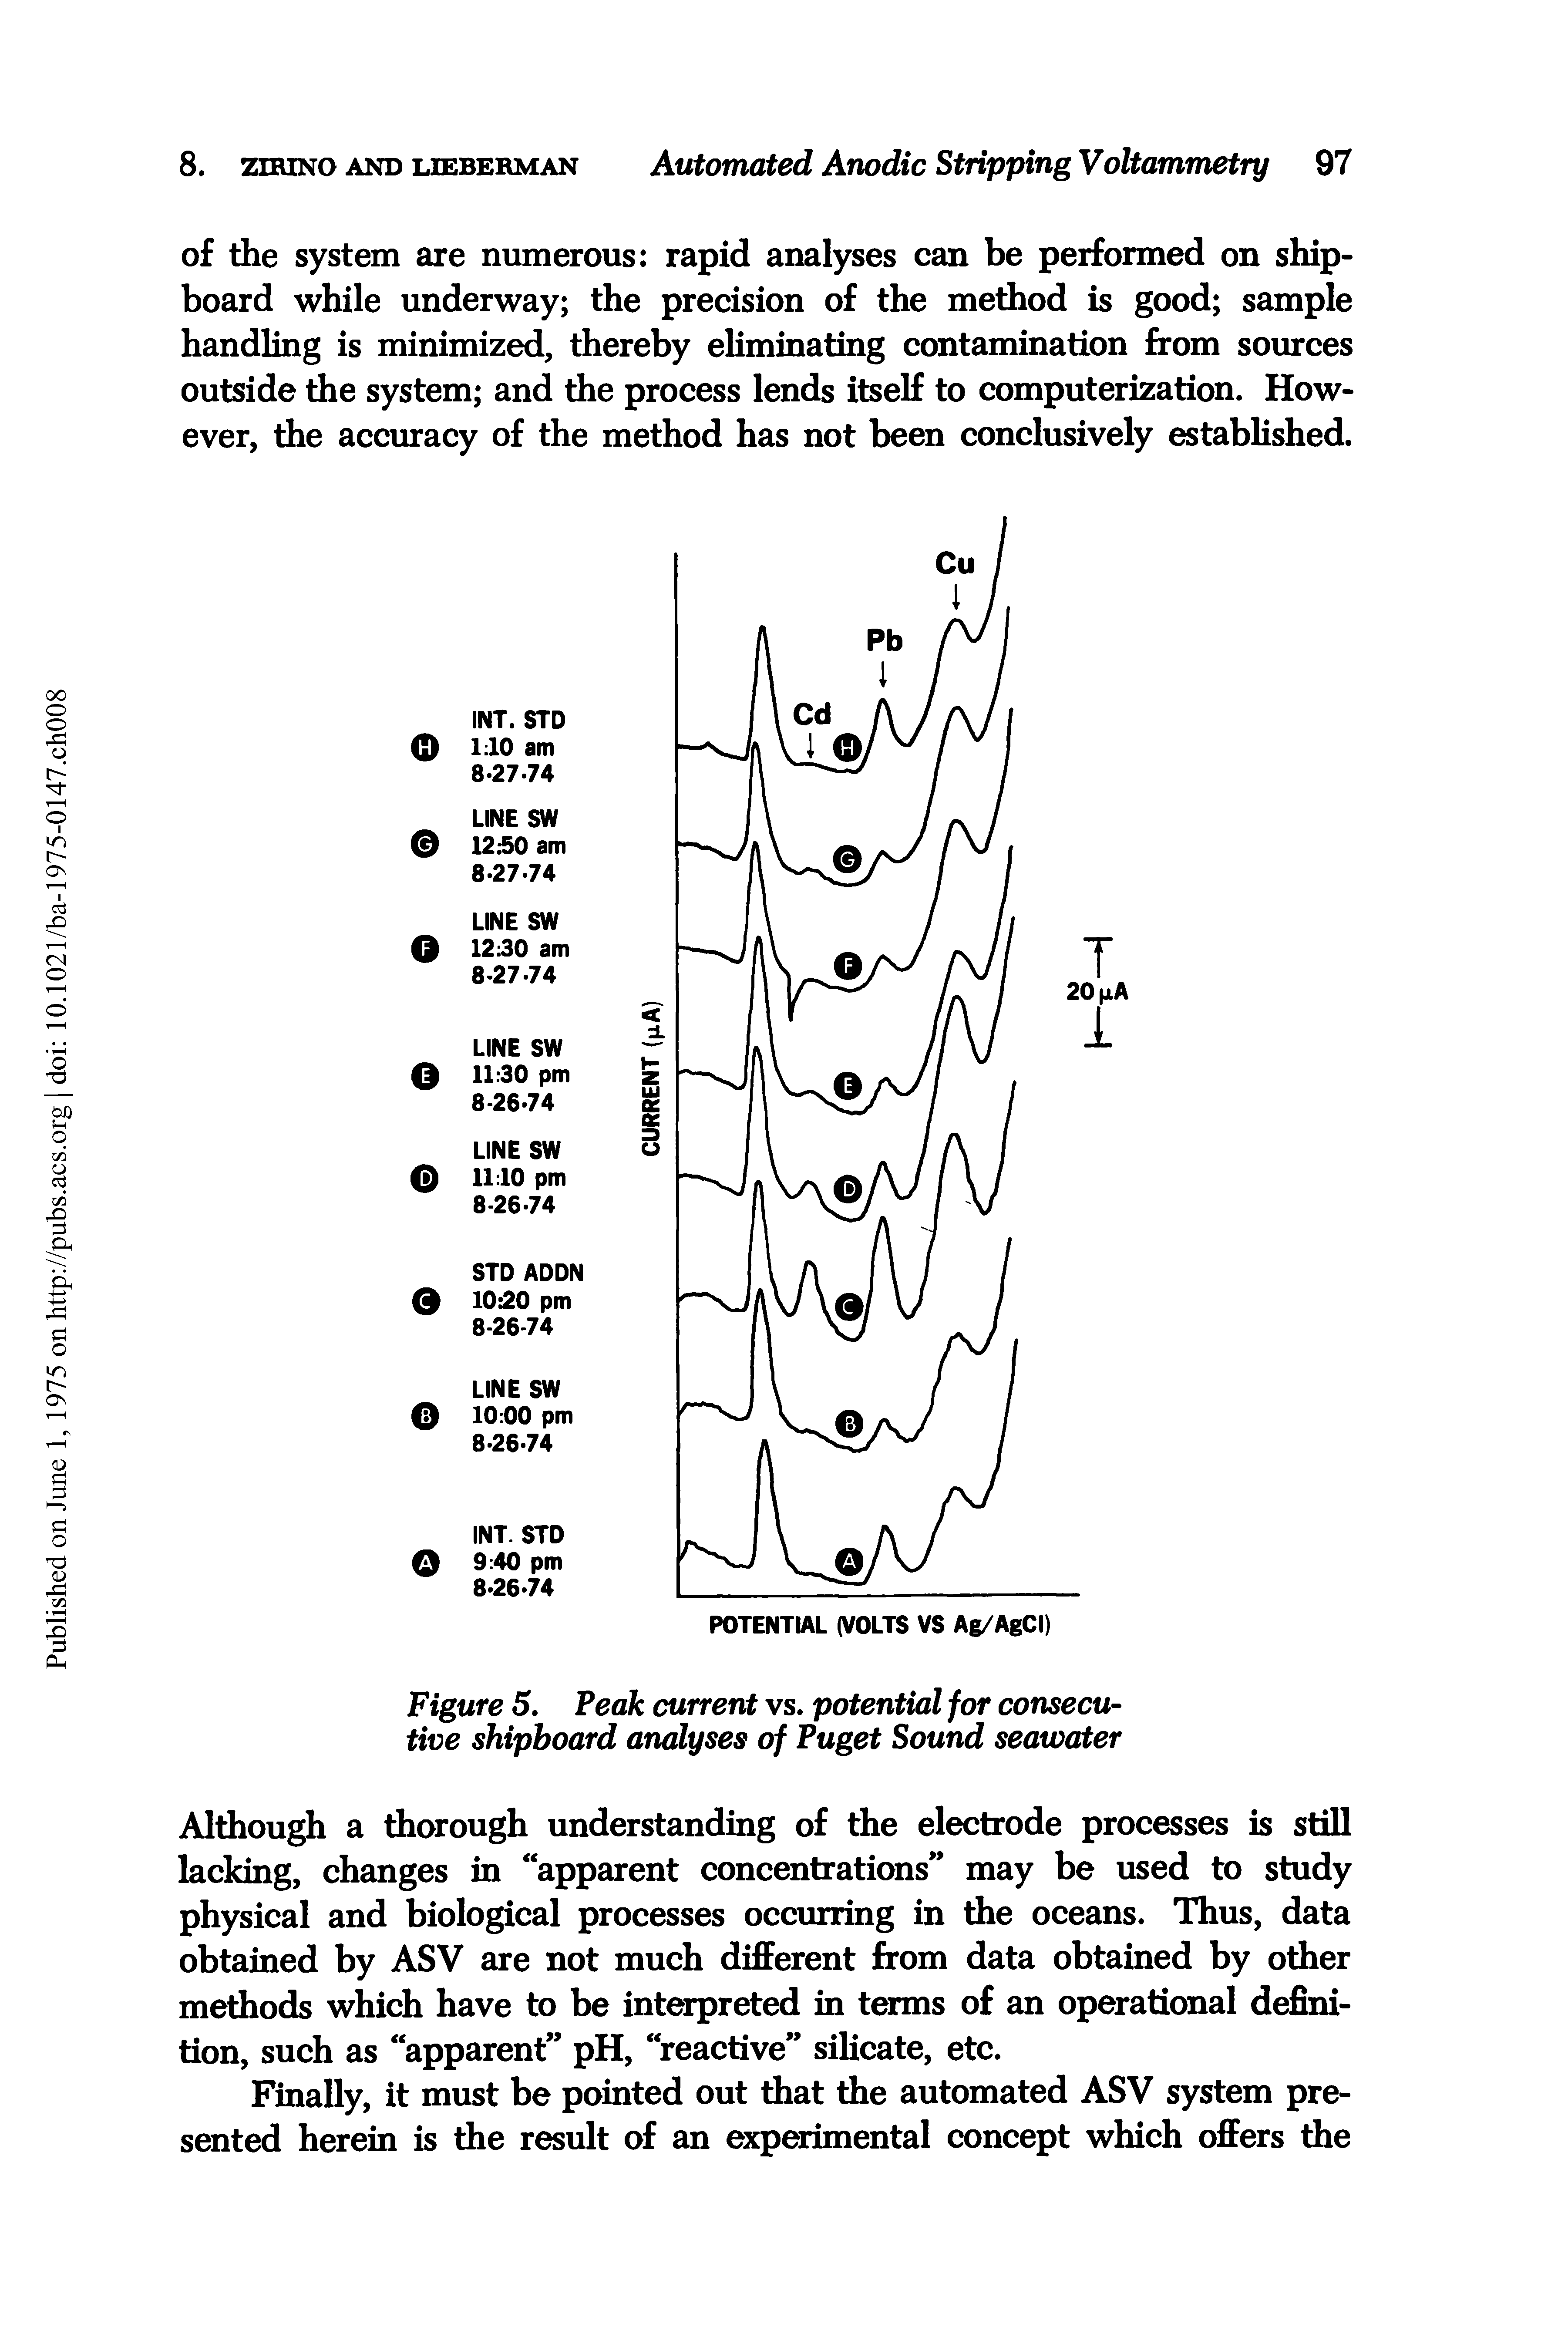 Figure 5. Peak current vs. potential for consecutive shipboard analyses of Puget Sound seawater...